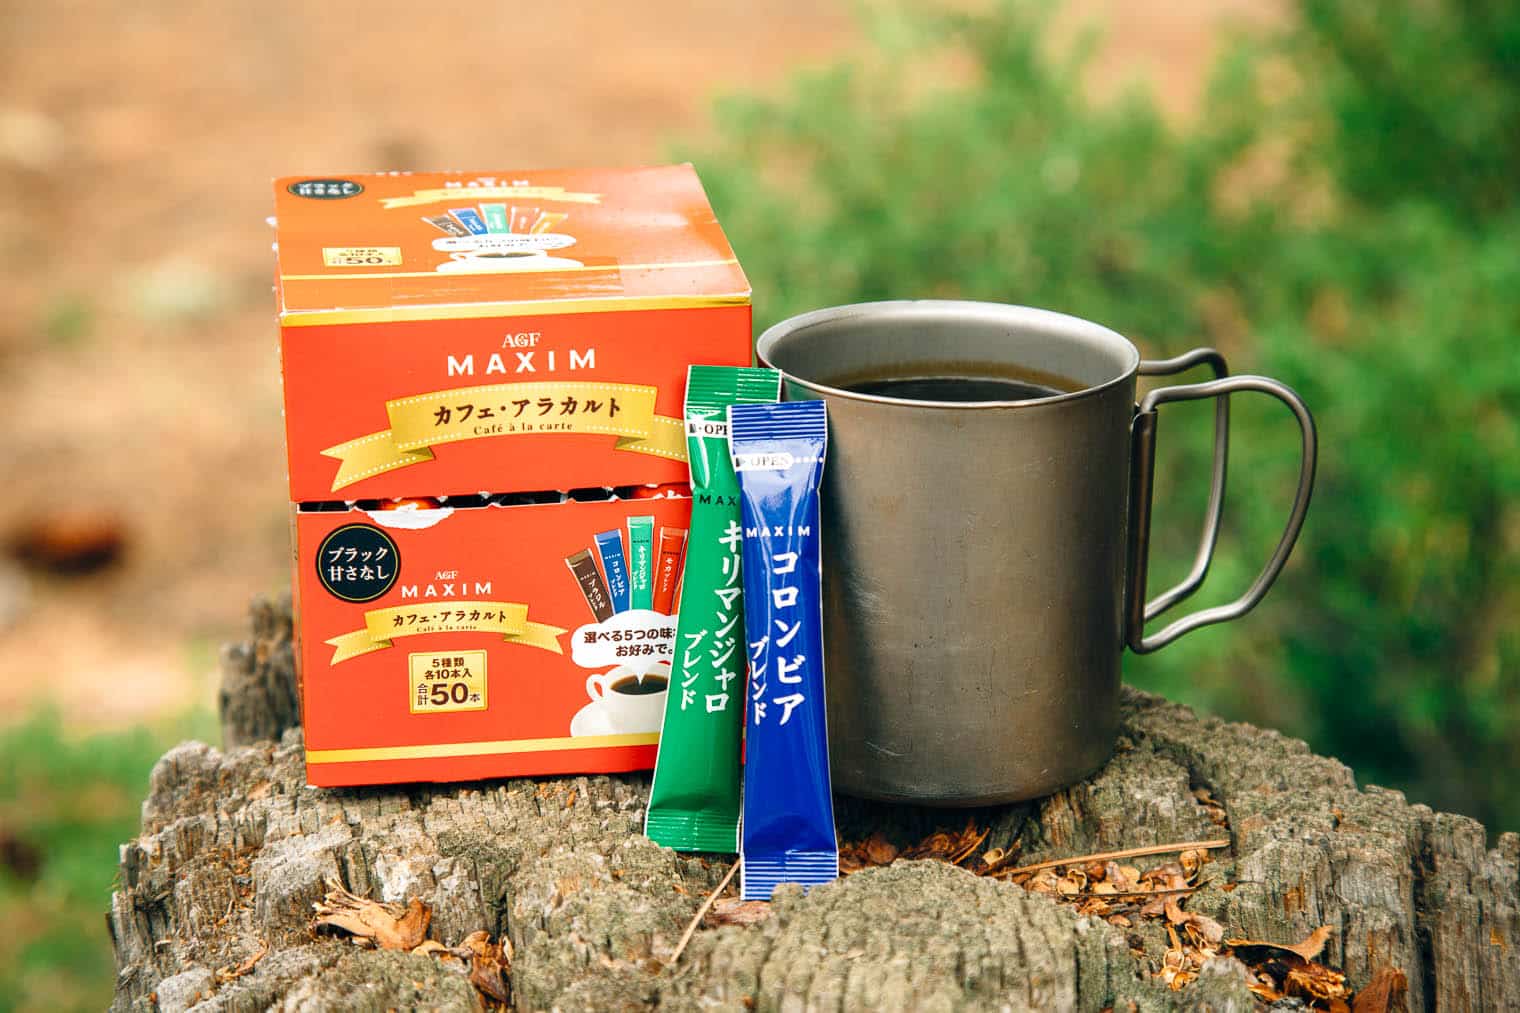 Maxim  instant coffee packaging next to a camp mug